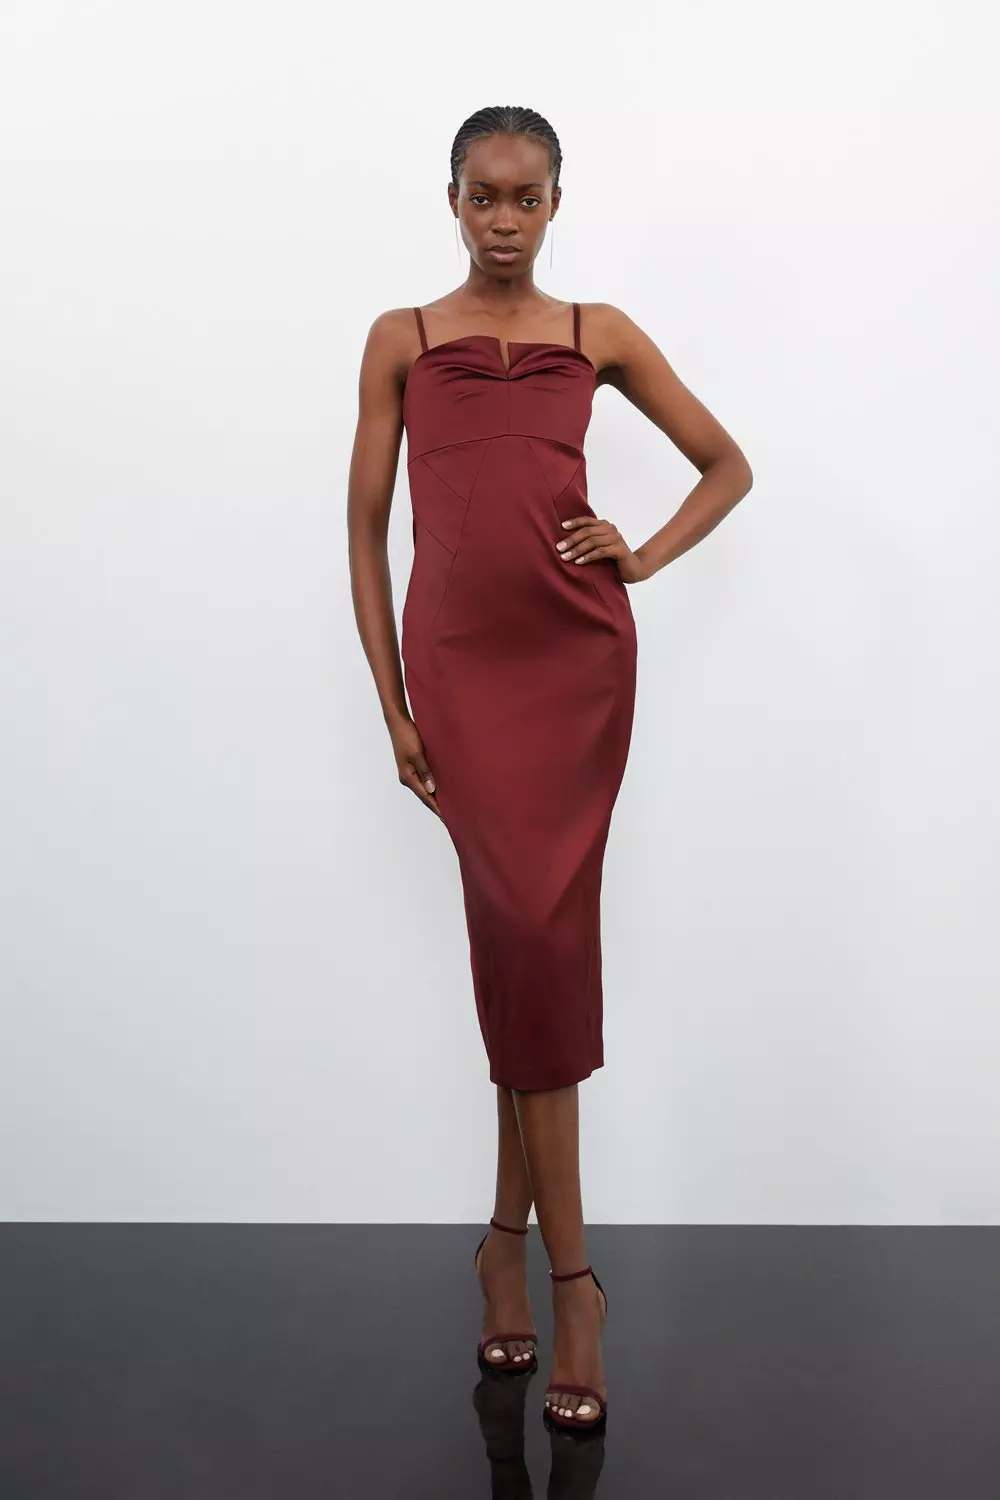 Acetate Camisole Dress With Tailored Blazer Two-Piece Suit